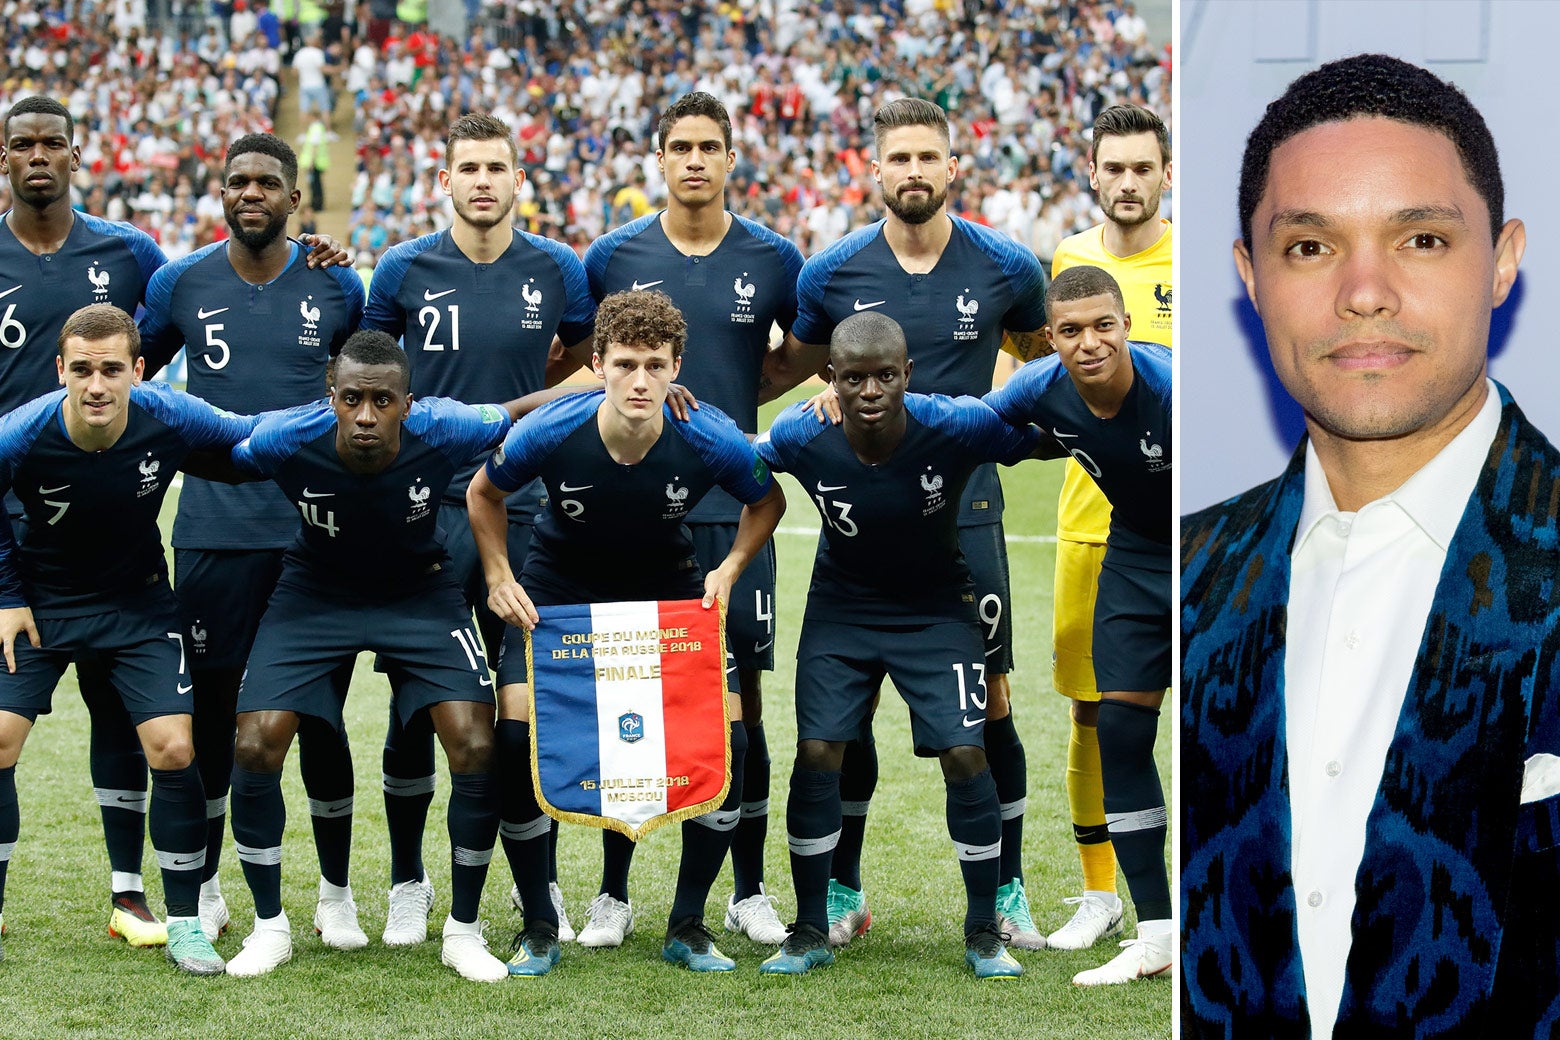 The French soccer team and Trevor Noah.